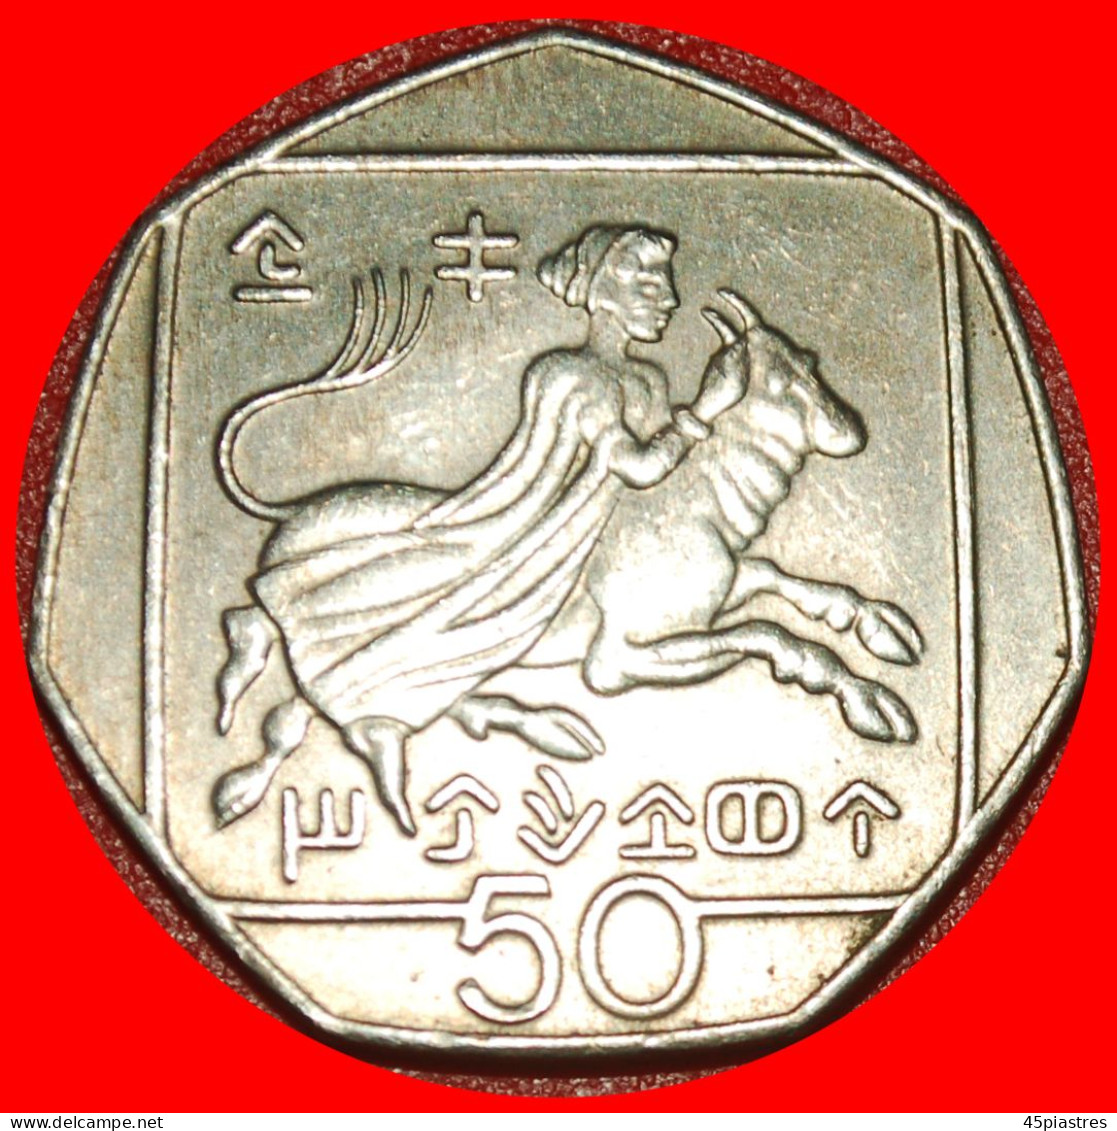 * SLOVAKIA (1991-2004): CYPRUS  50 CENTS 2002 MINT LUSTRE HEPTAGON~ABDUCTION OF EUROPA!· LOW START ·  NO RESERVE! - Chypre